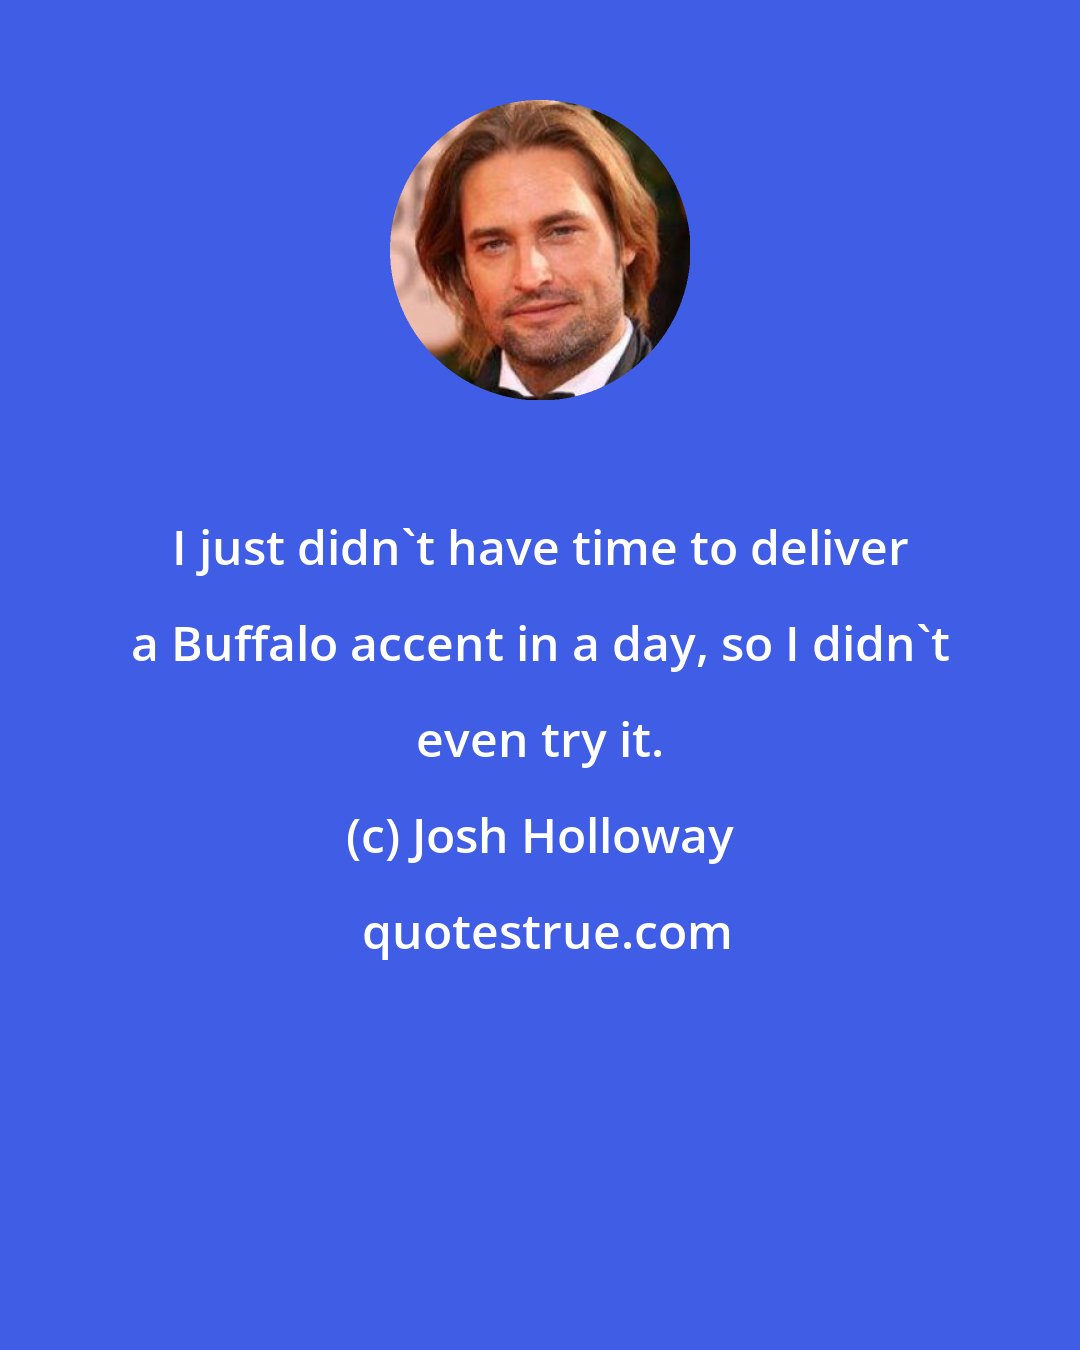 Josh Holloway: I just didn't have time to deliver a Buffalo accent in a day, so I didn't even try it.